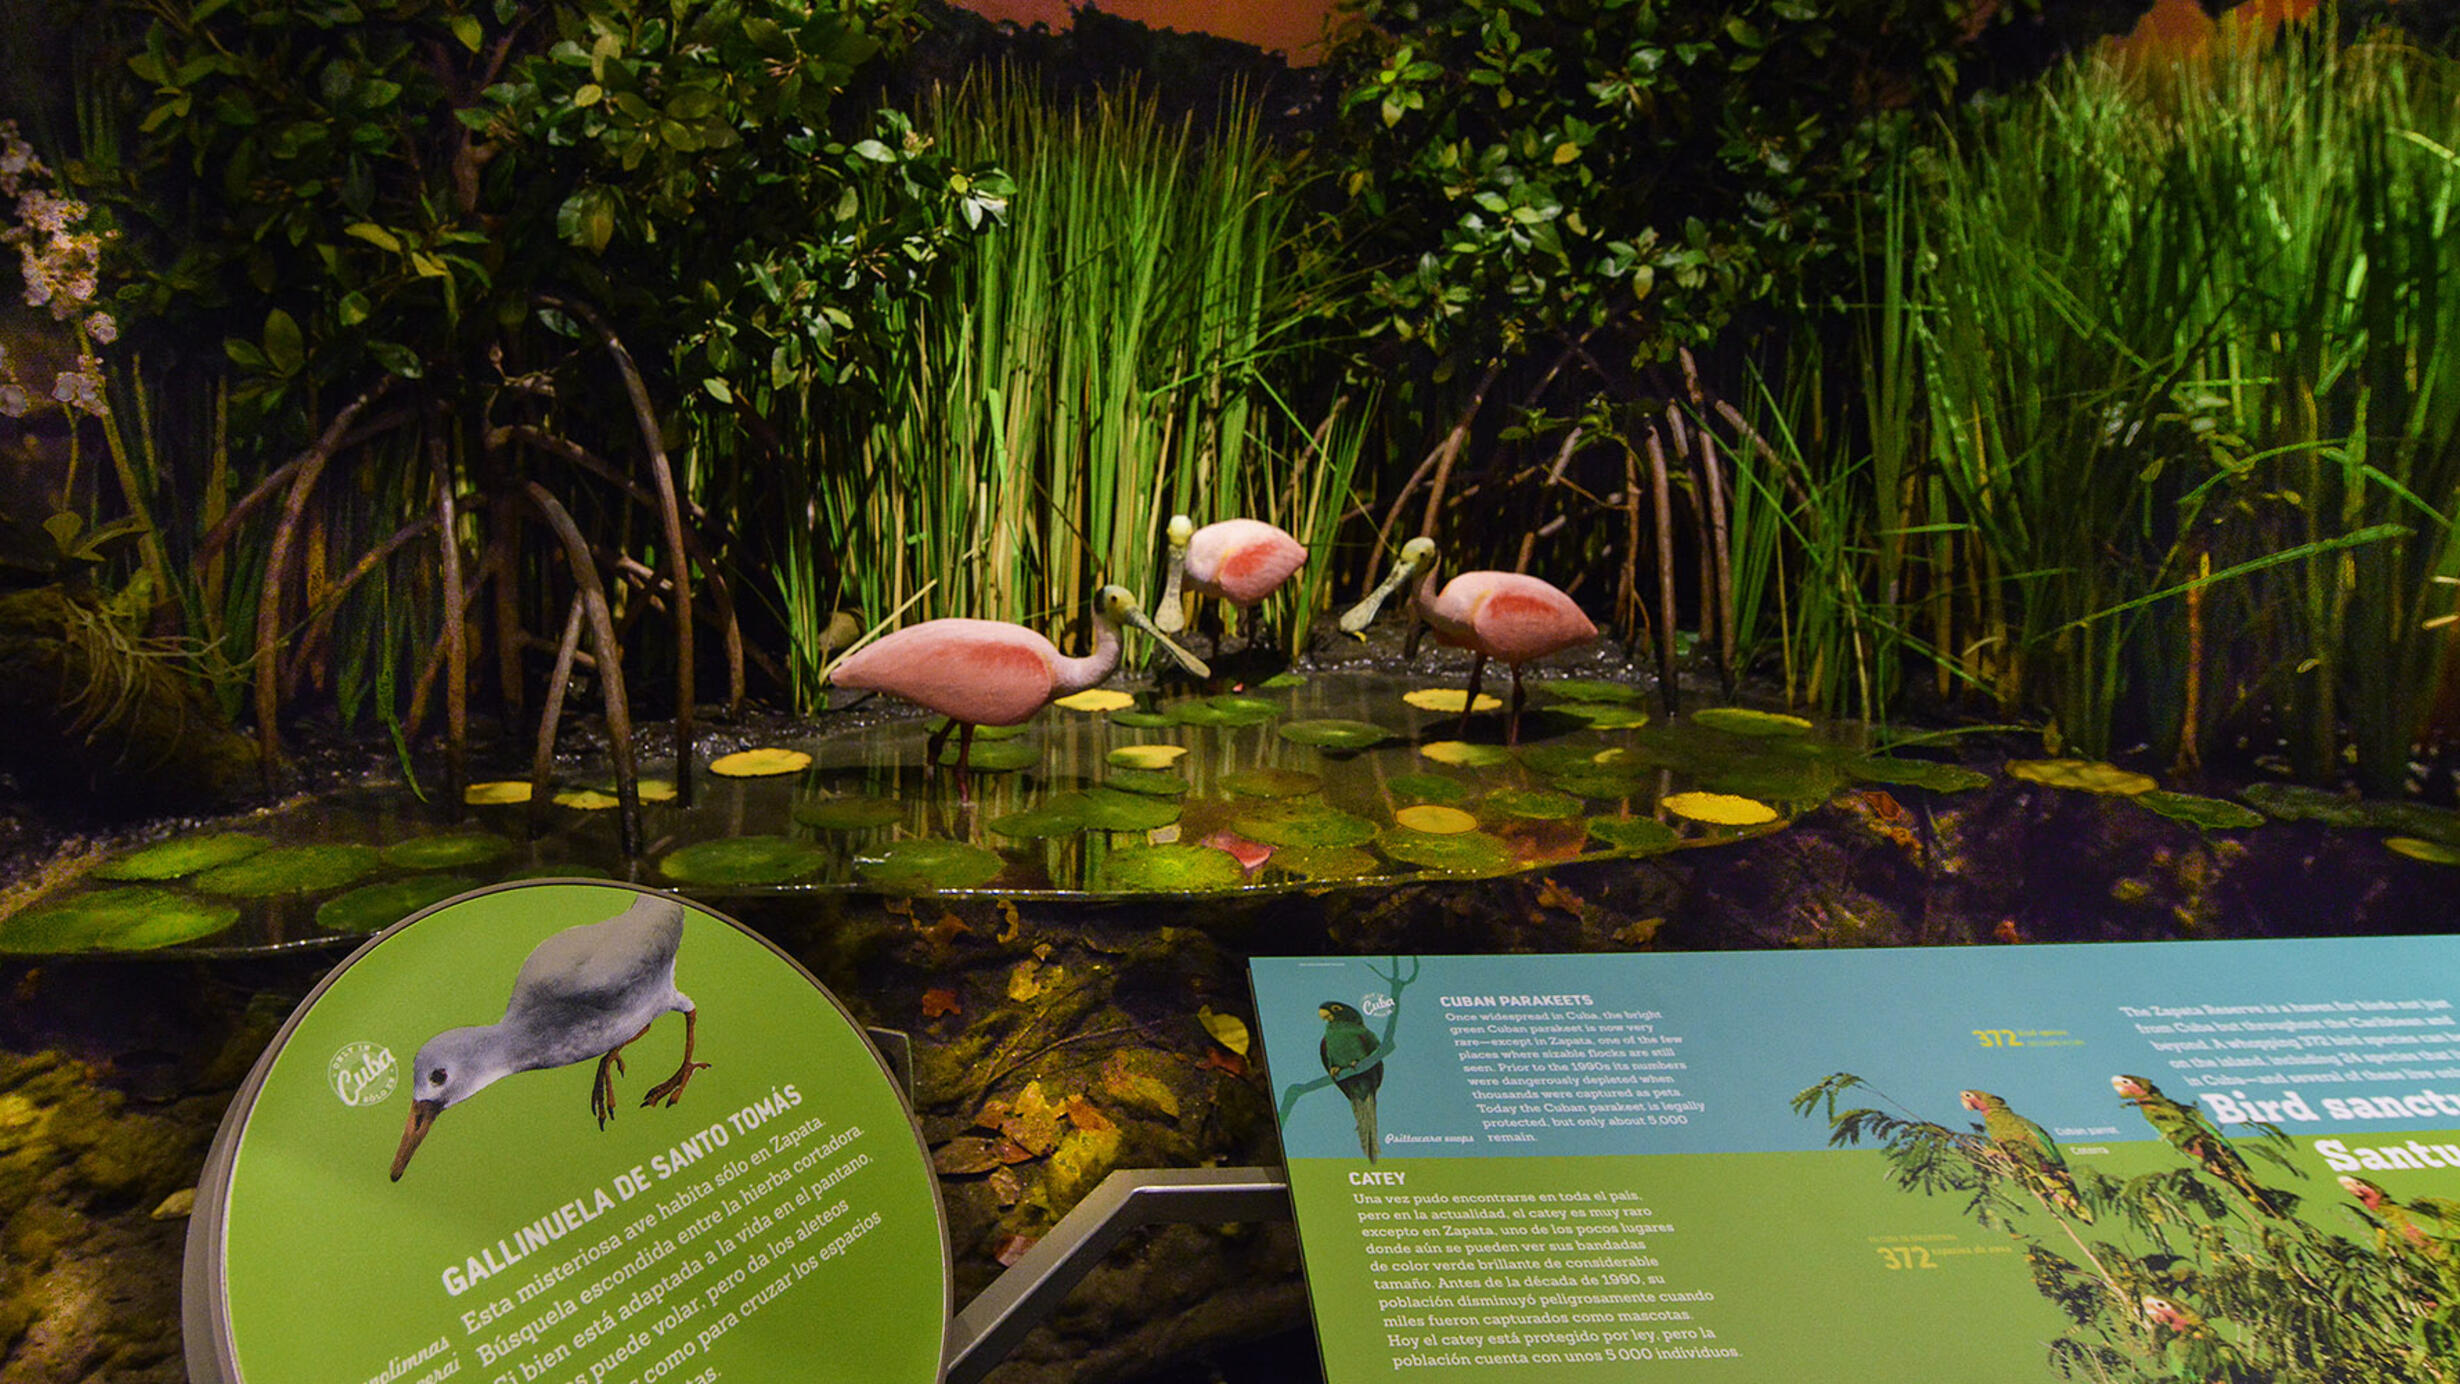 Re-creation of the Zapata Wetlands featuring marshy grasses, mangrove trees and models of three Roseate spoonbills.